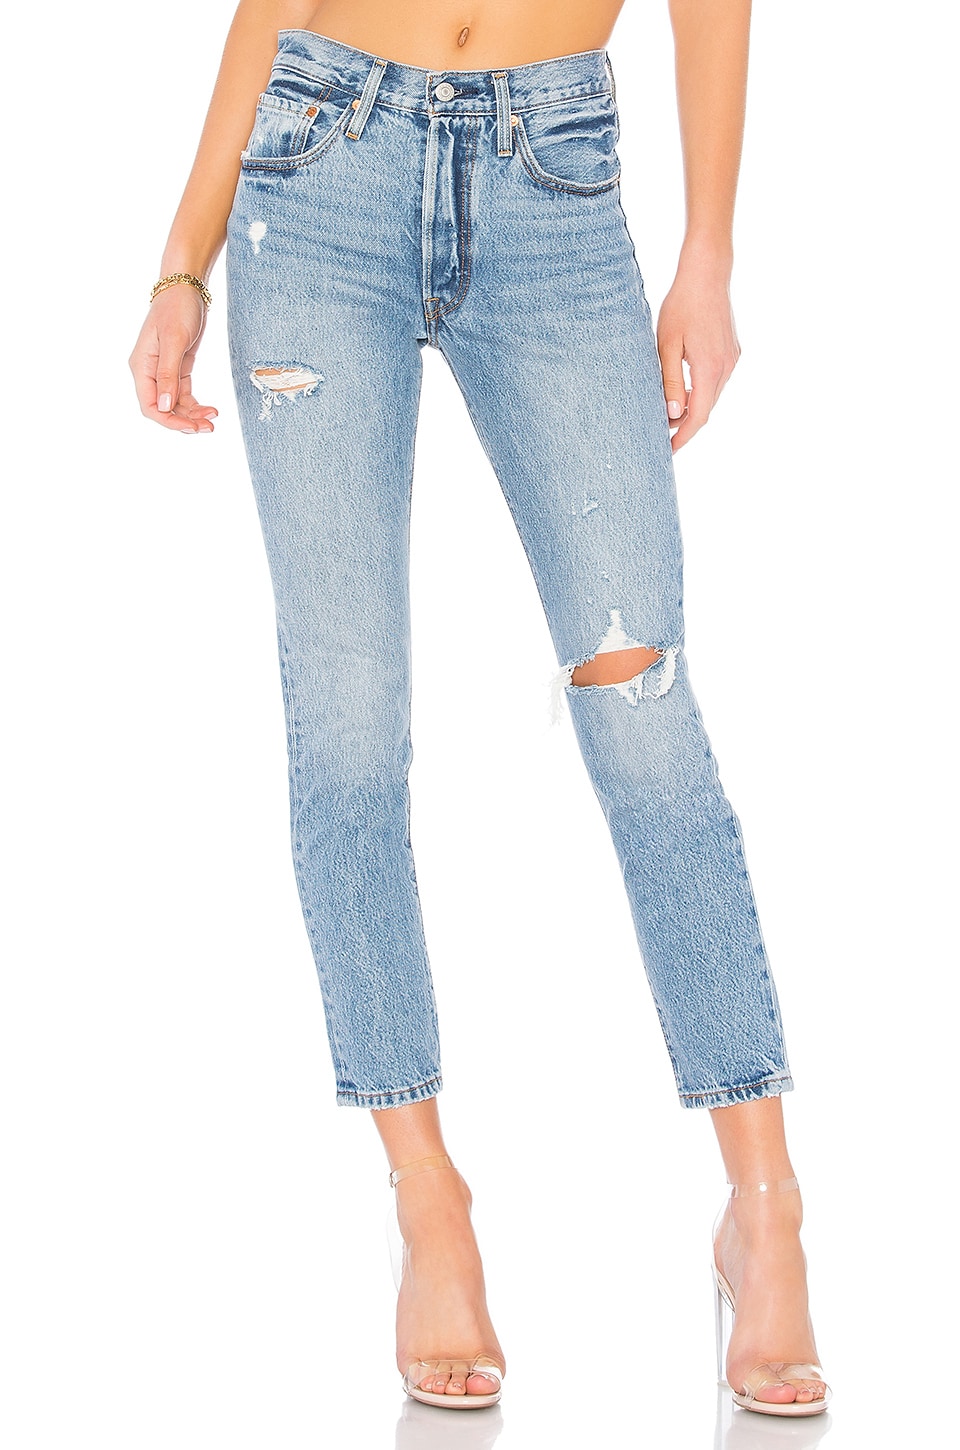 Zeug Perseus Bijdrage LEVI'S 501 Skinny in Can't Touch This | REVOLVE